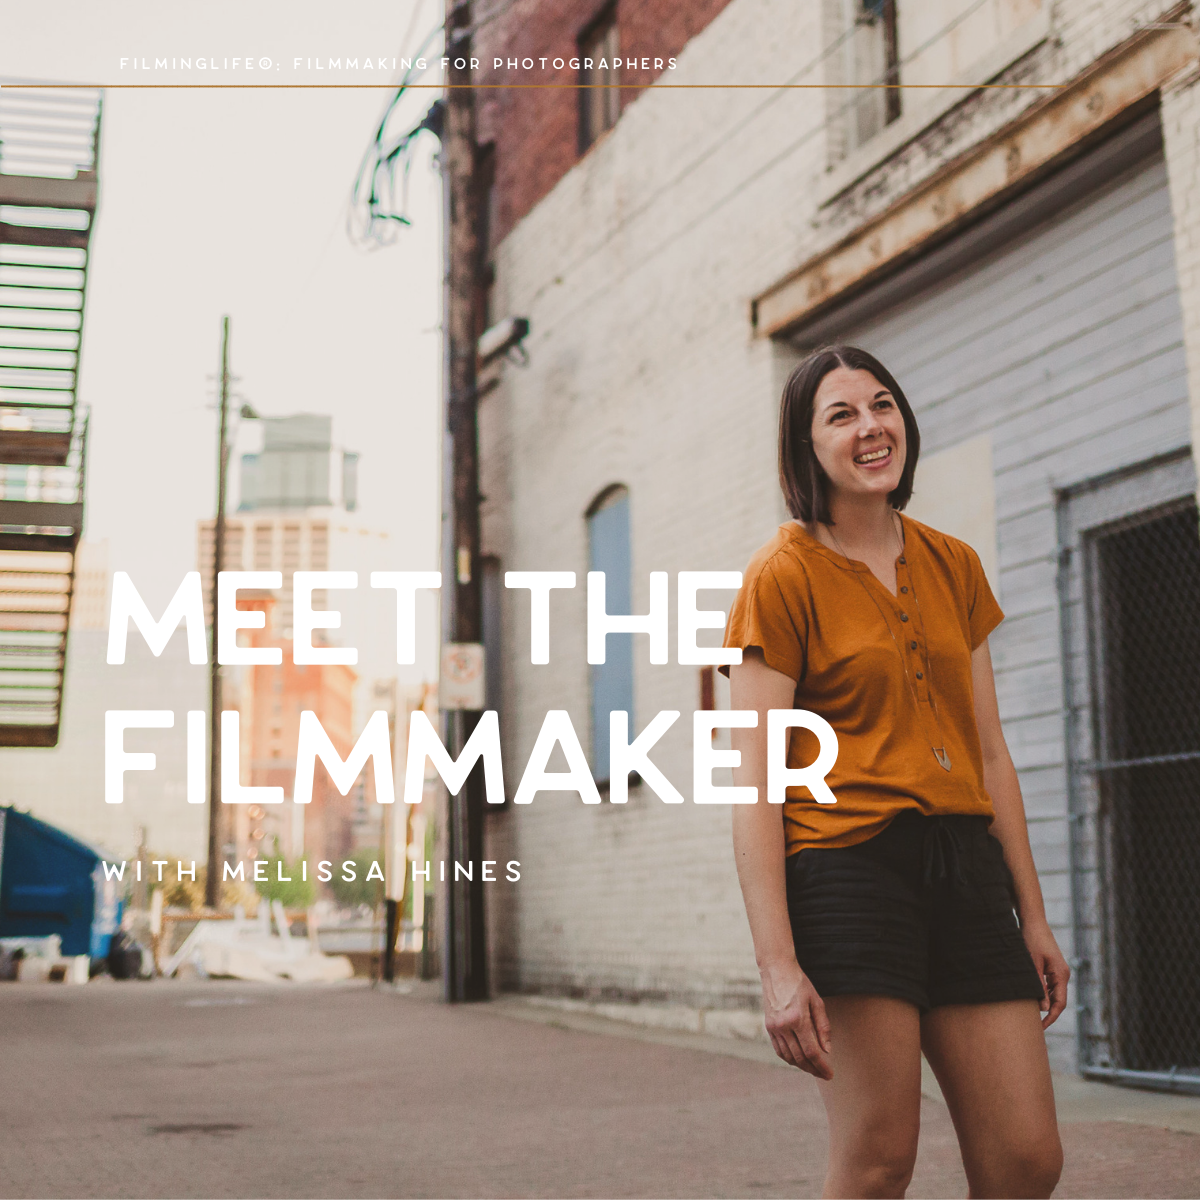 Filmmaker Melissa Hines standing in front of a while building and smiling at someone off camera. The text reads 